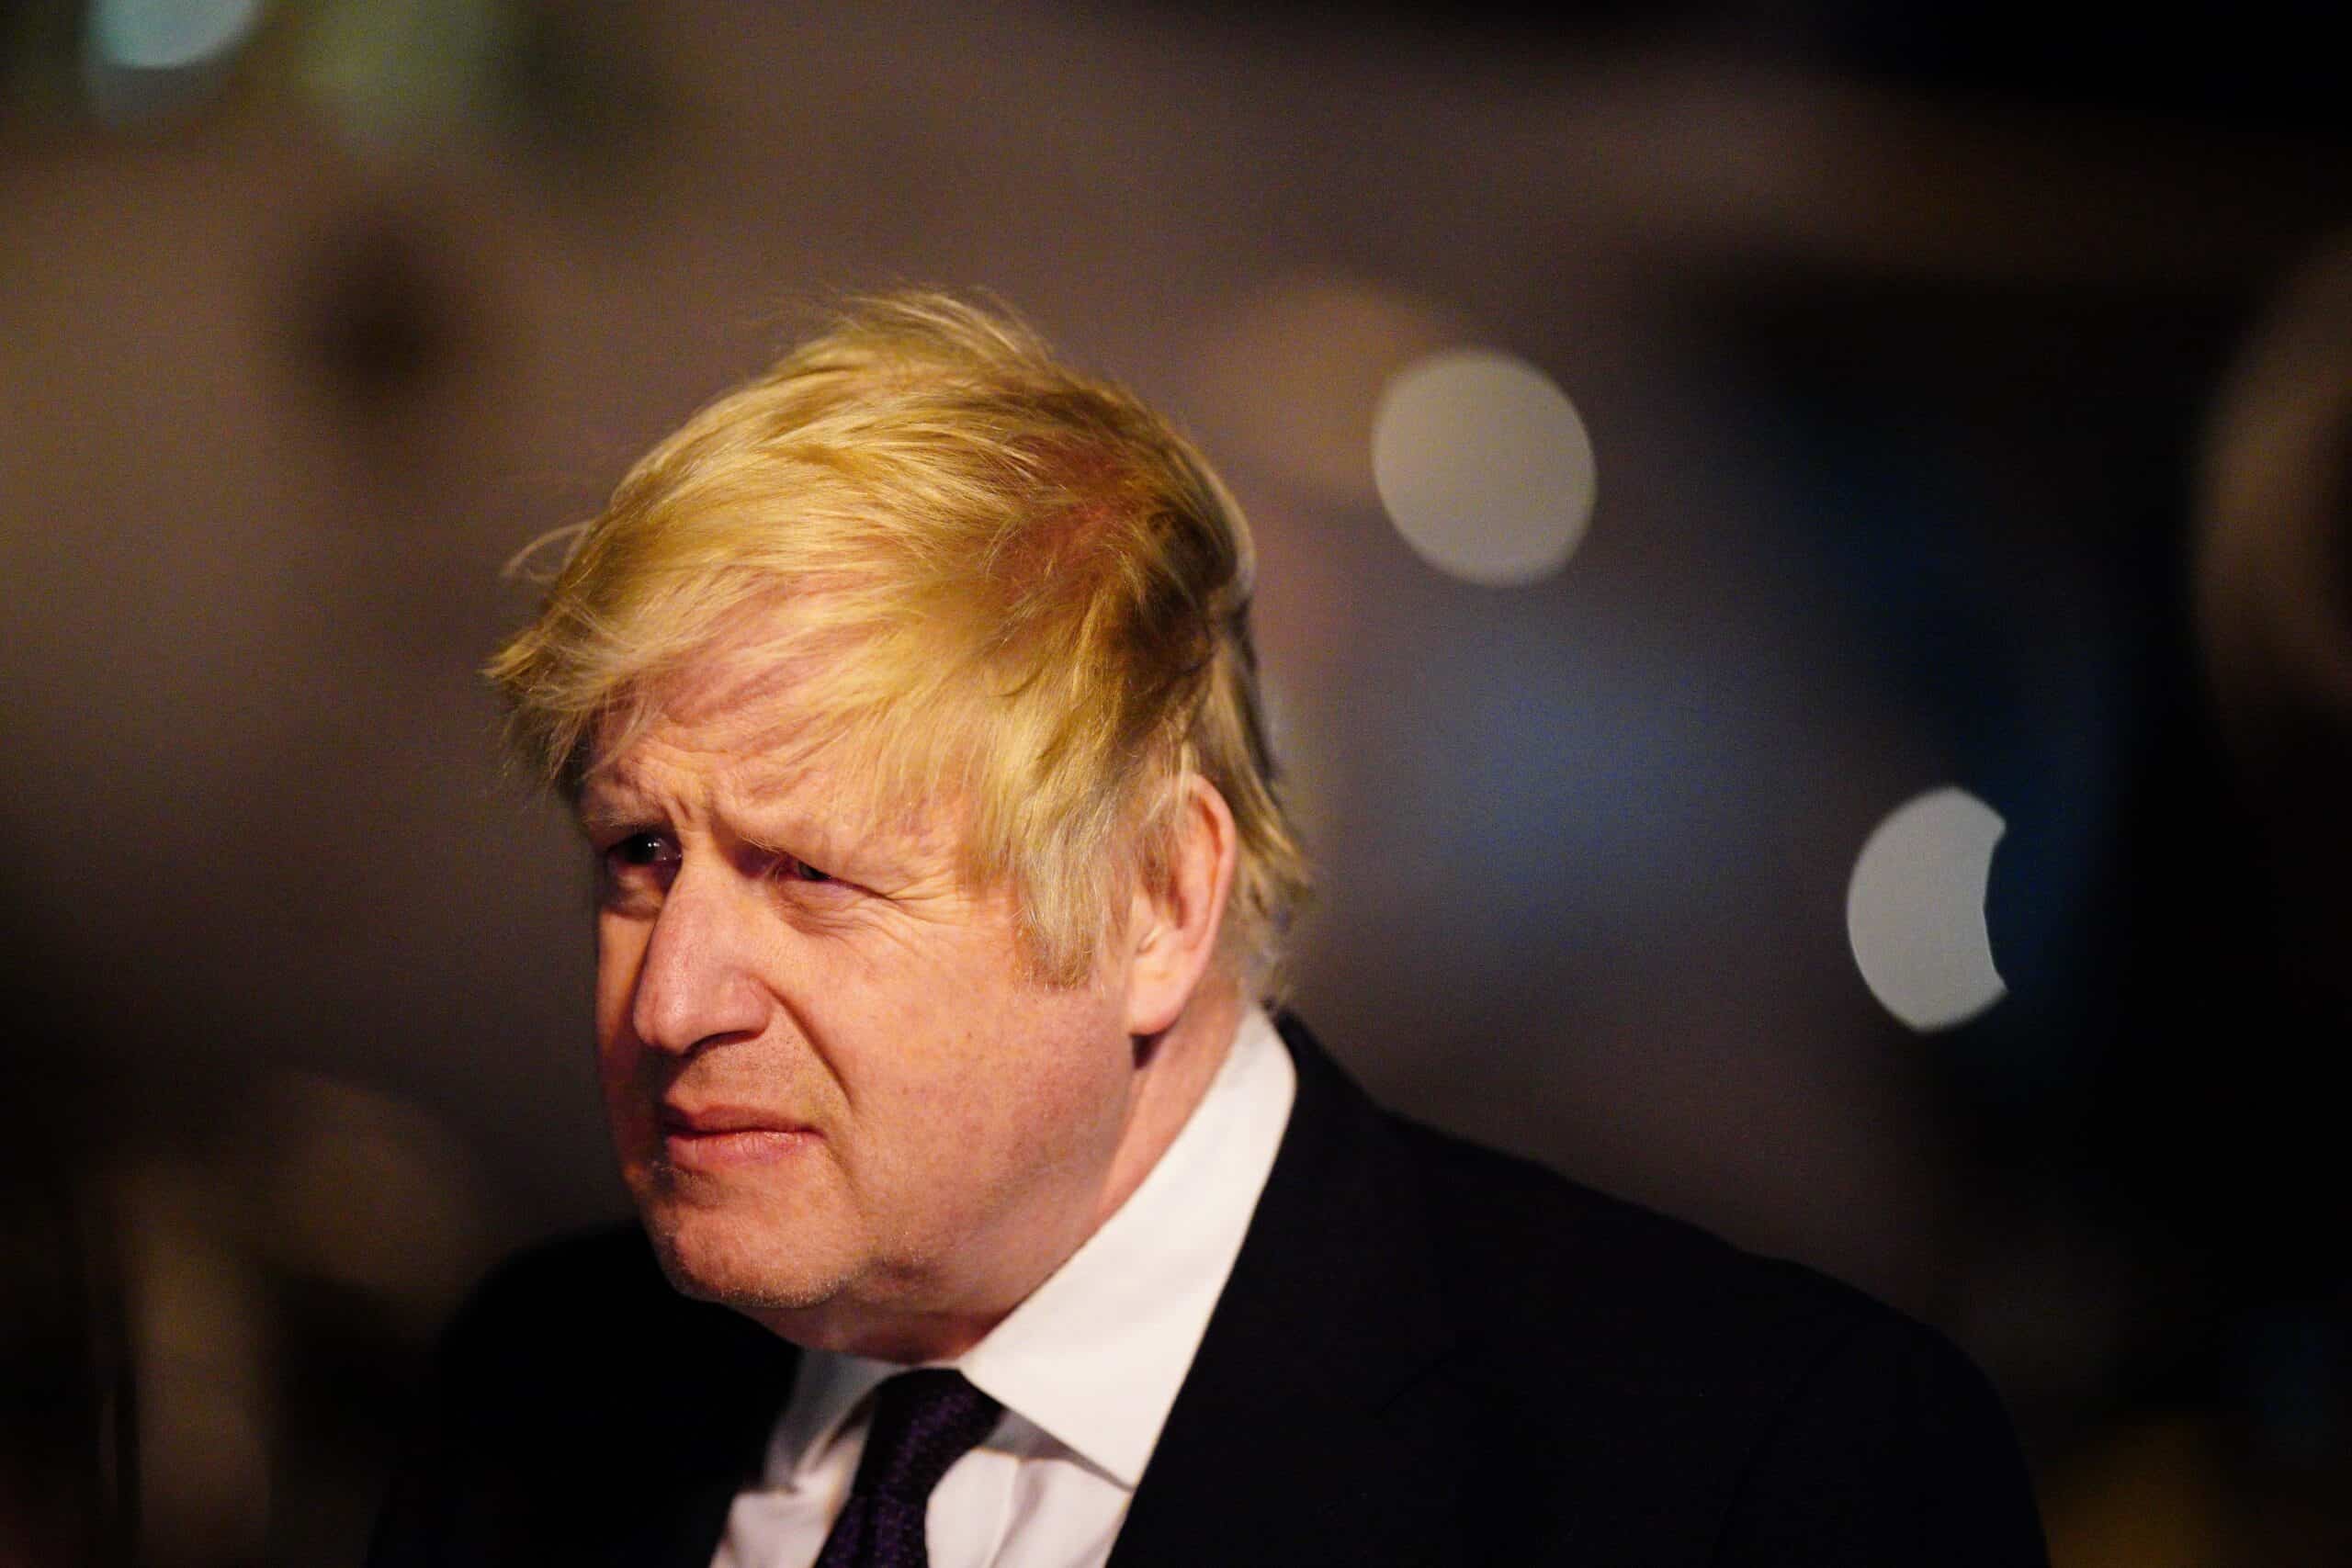 Putin threatened to kill me with a missile – Johnson